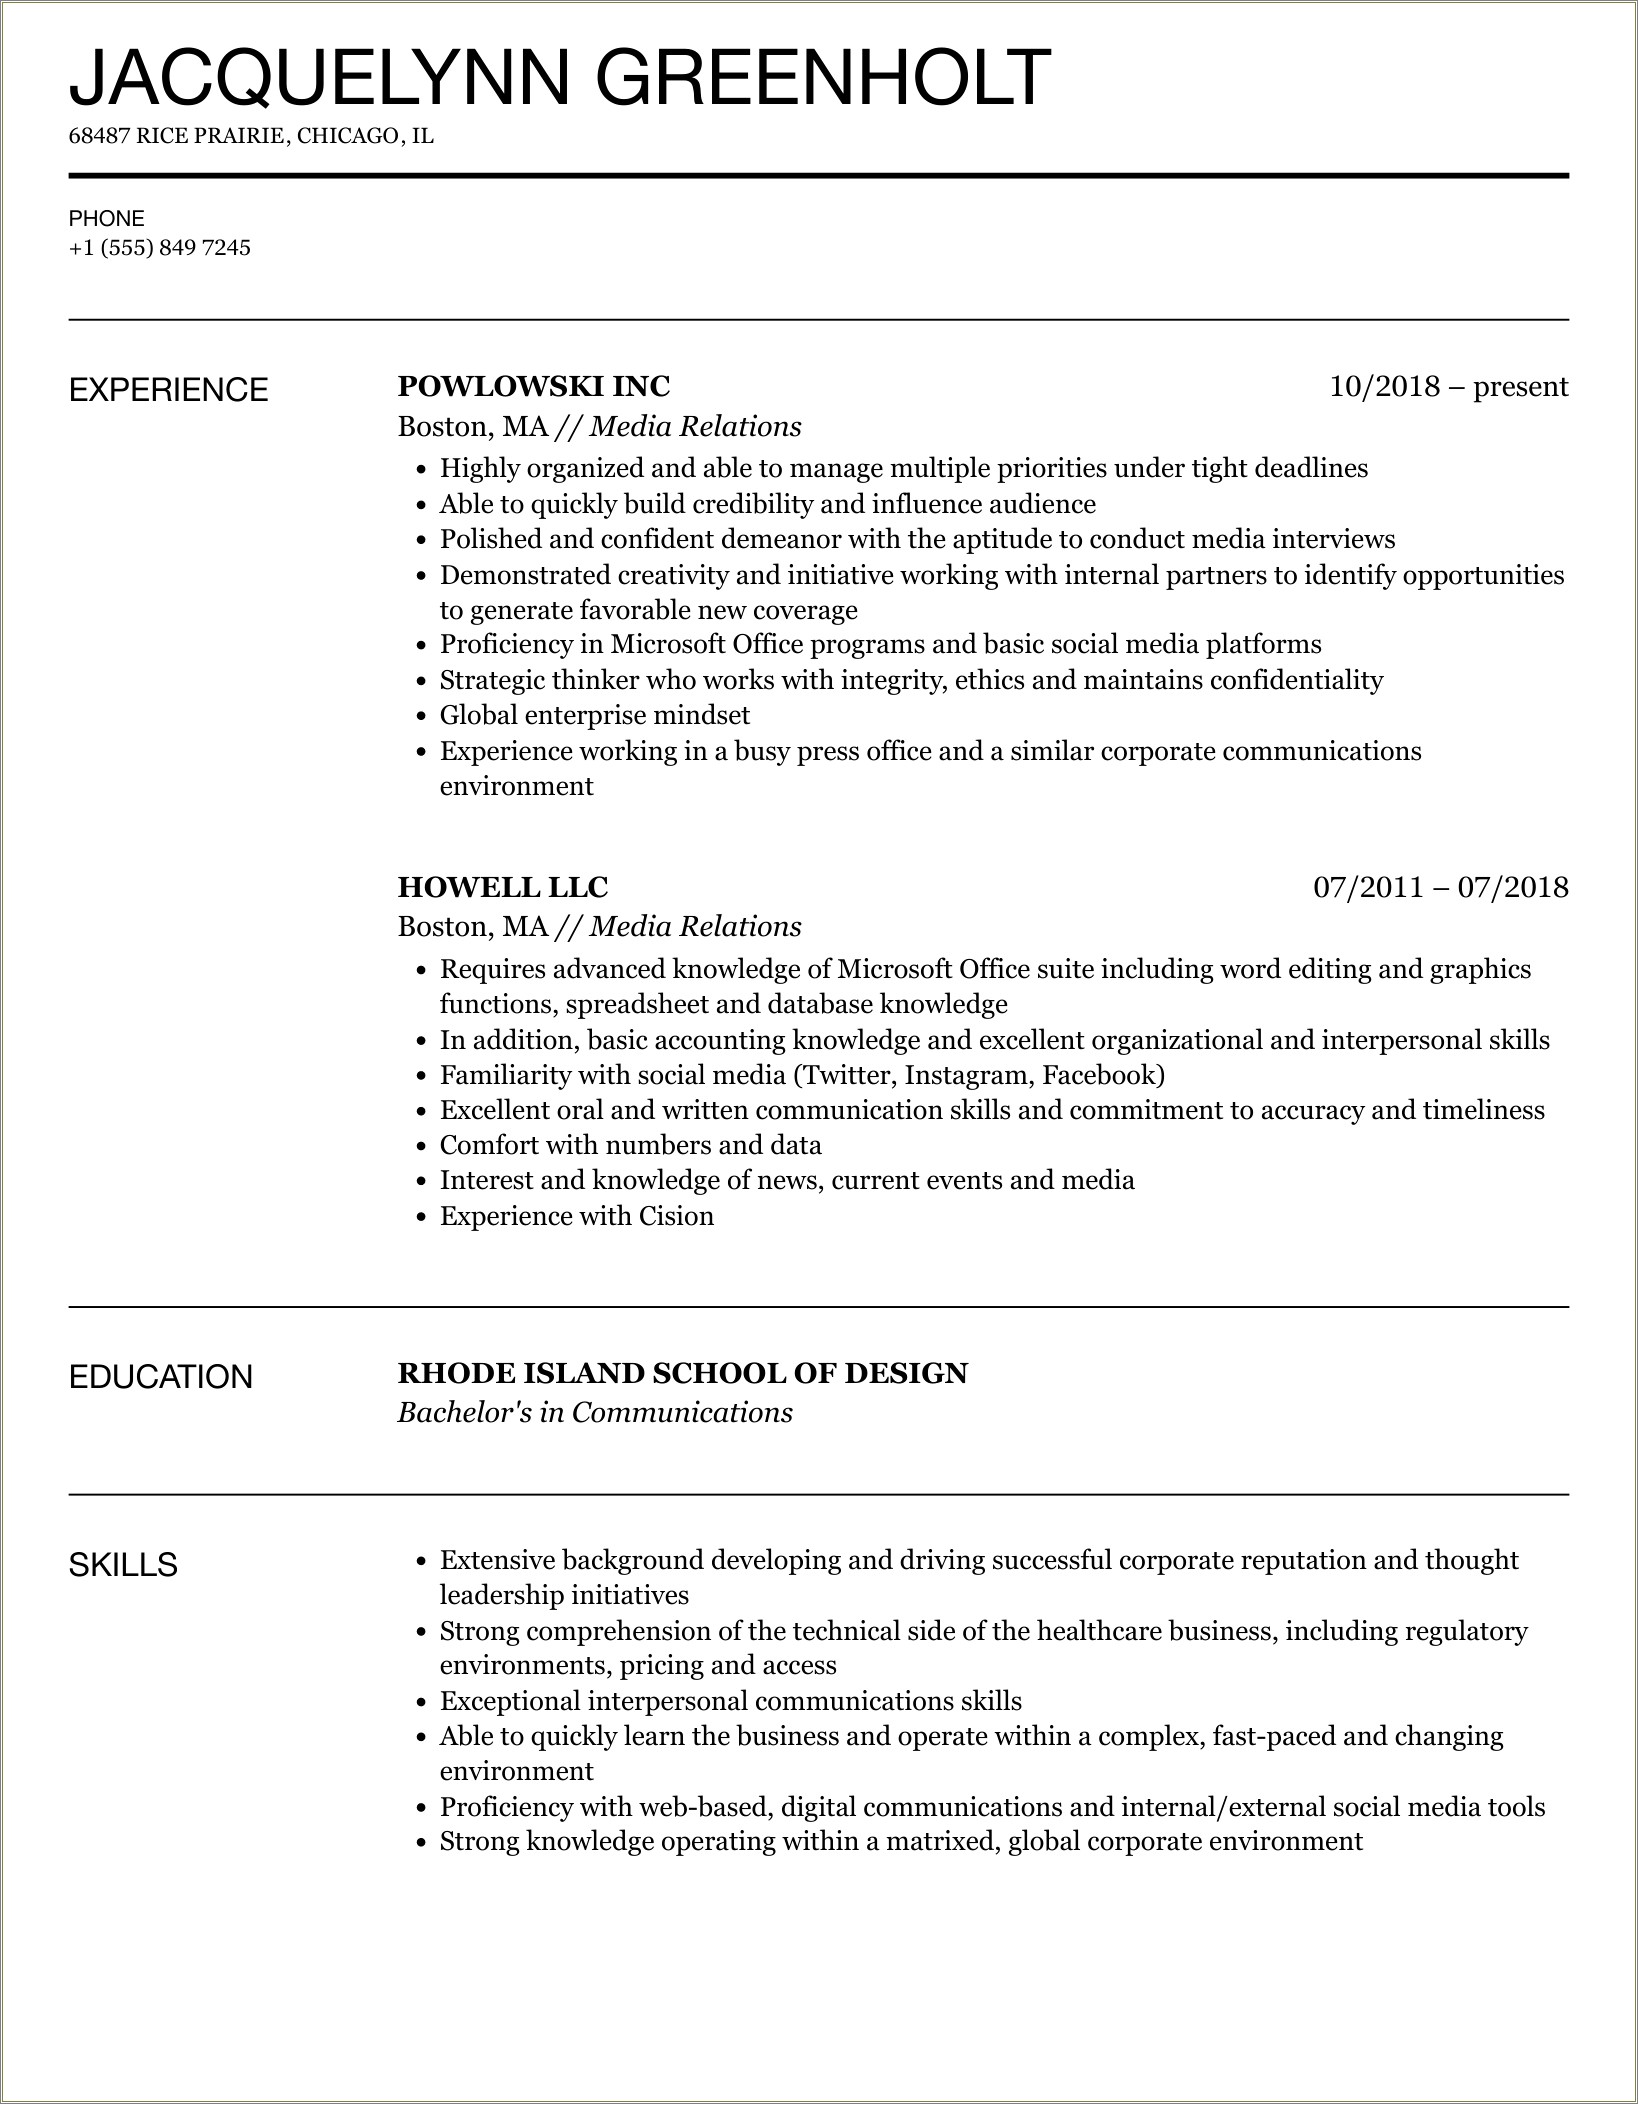 Sample Objective Statements For Public Relations Resume